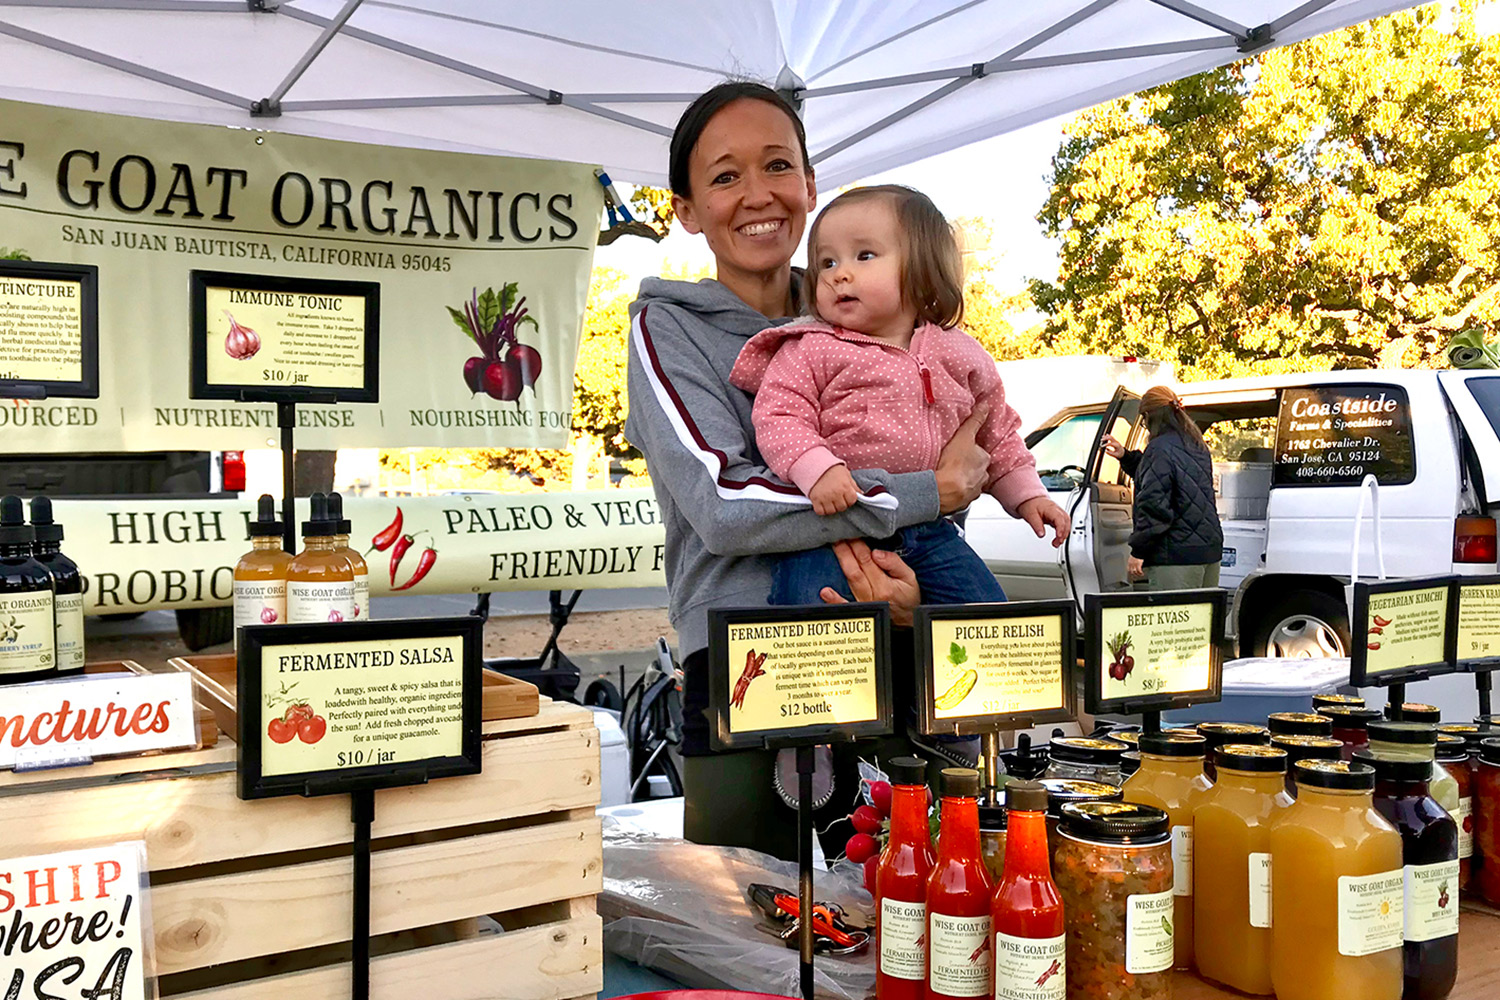 Mary at the Wise Goat Organics stand